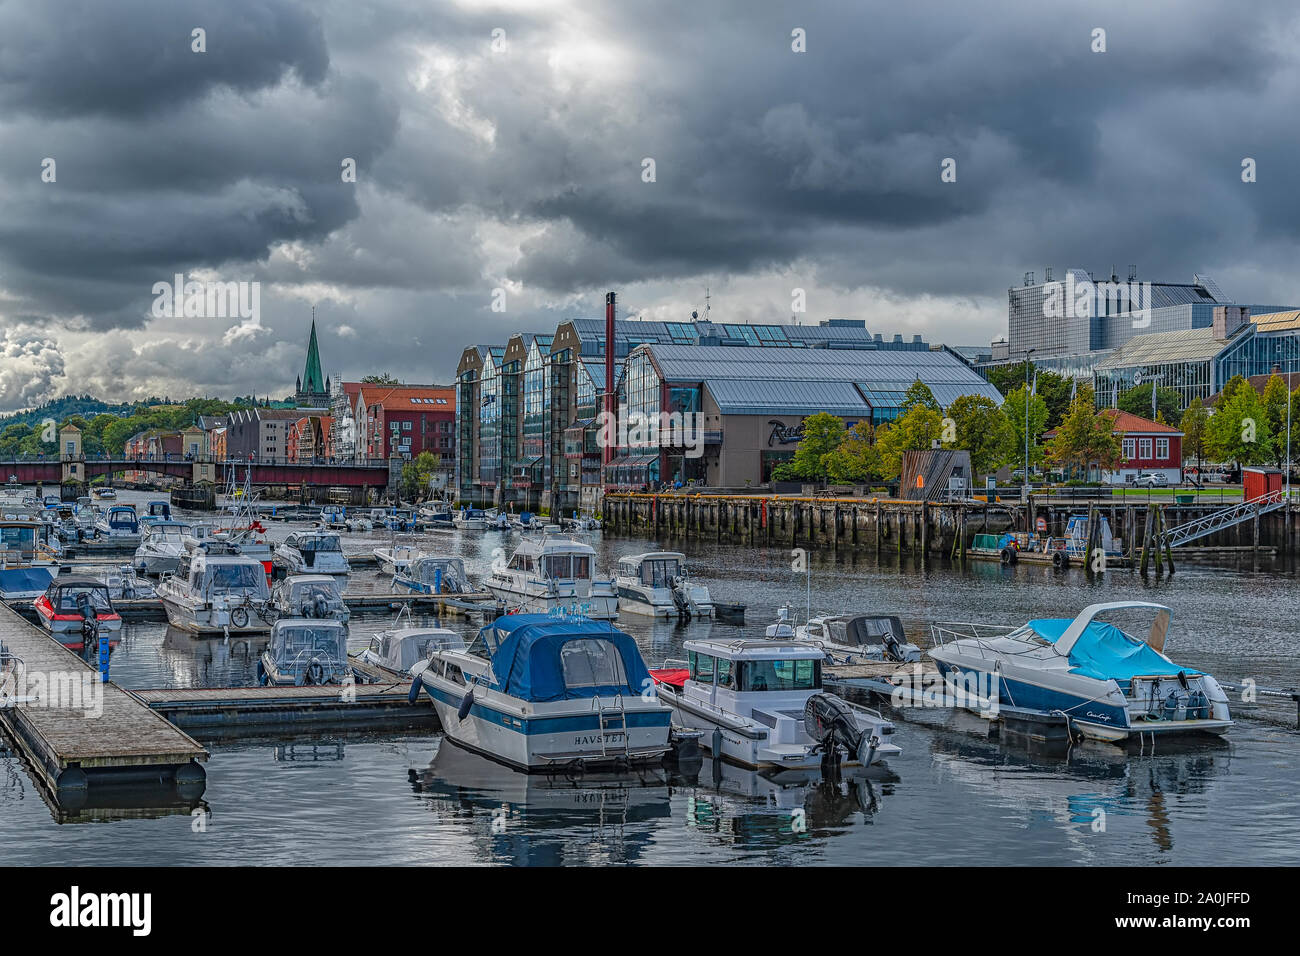 TRONDHEIM, NORWAY - SEPTEMBER 07, 2019: The Radisson Blu Royal Garden Hotel in Trondheim boasts an exceptional design and a location next to the city' Stock Photo